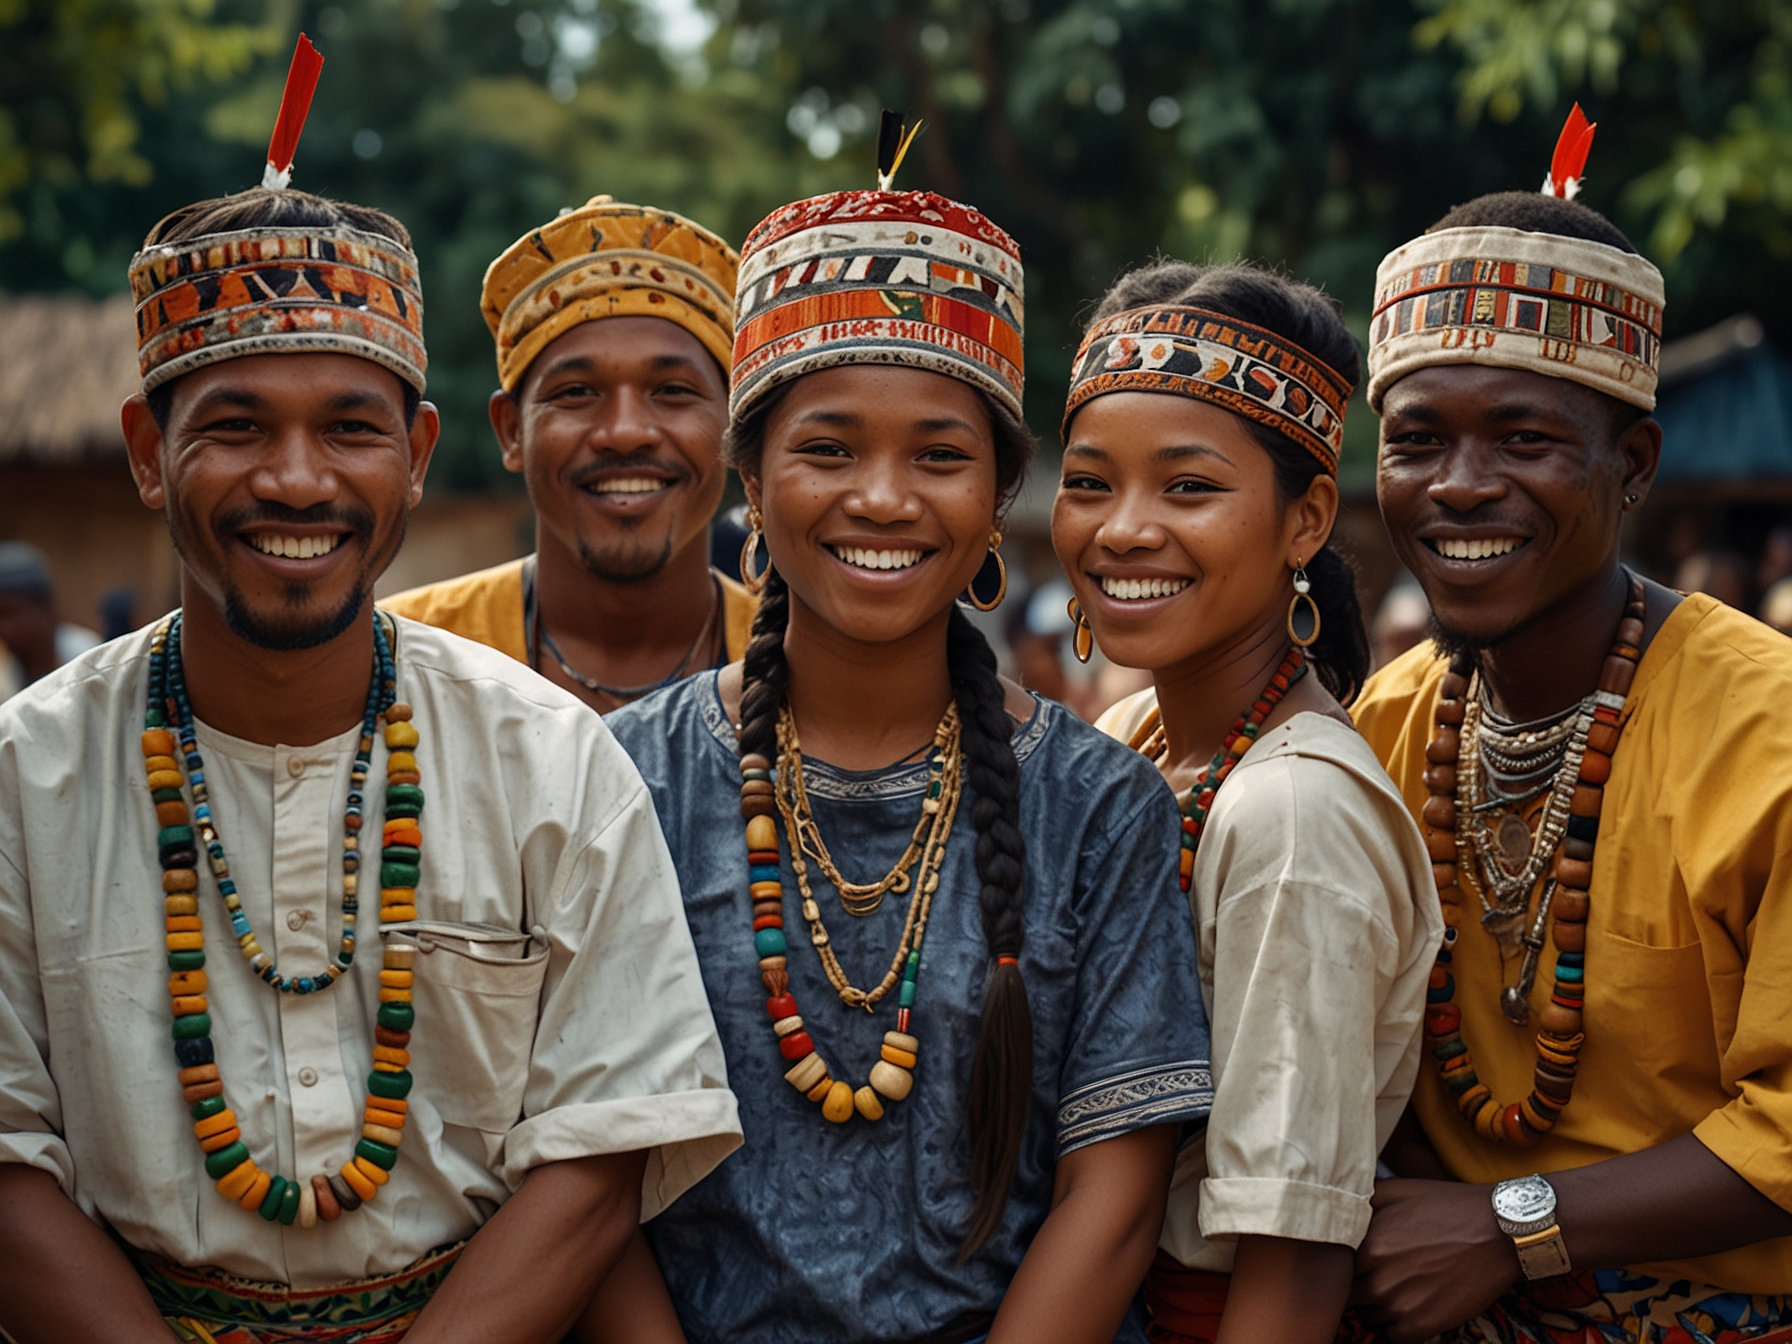 Members of the Kabi Kabi community celebrating their legal victory with traditional attire and ceremonies, emphasizing their enduring connection to their ancestral lands and cultural heritage.